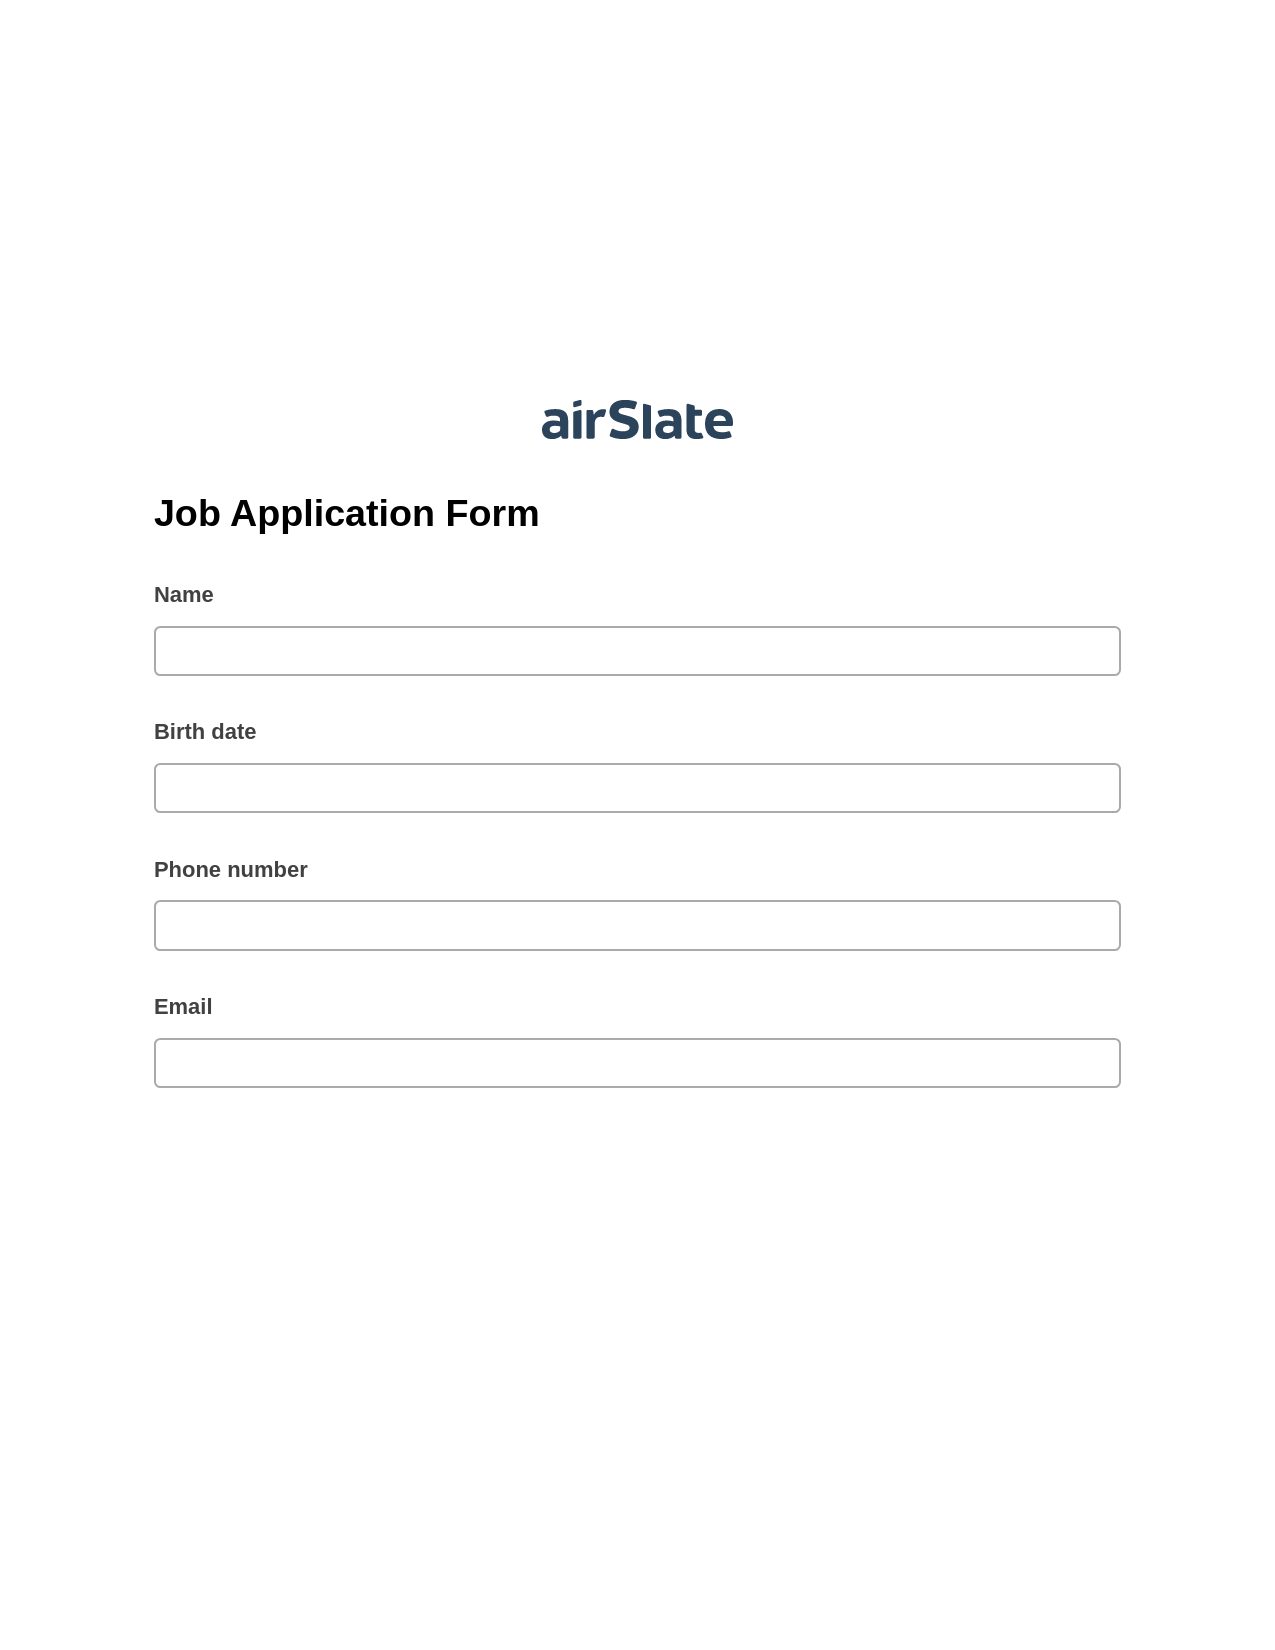 Job Application Form Pre-fill from Google Sheets Bot, Update NetSuite Records Bot, Export to NetSuite Record Bot